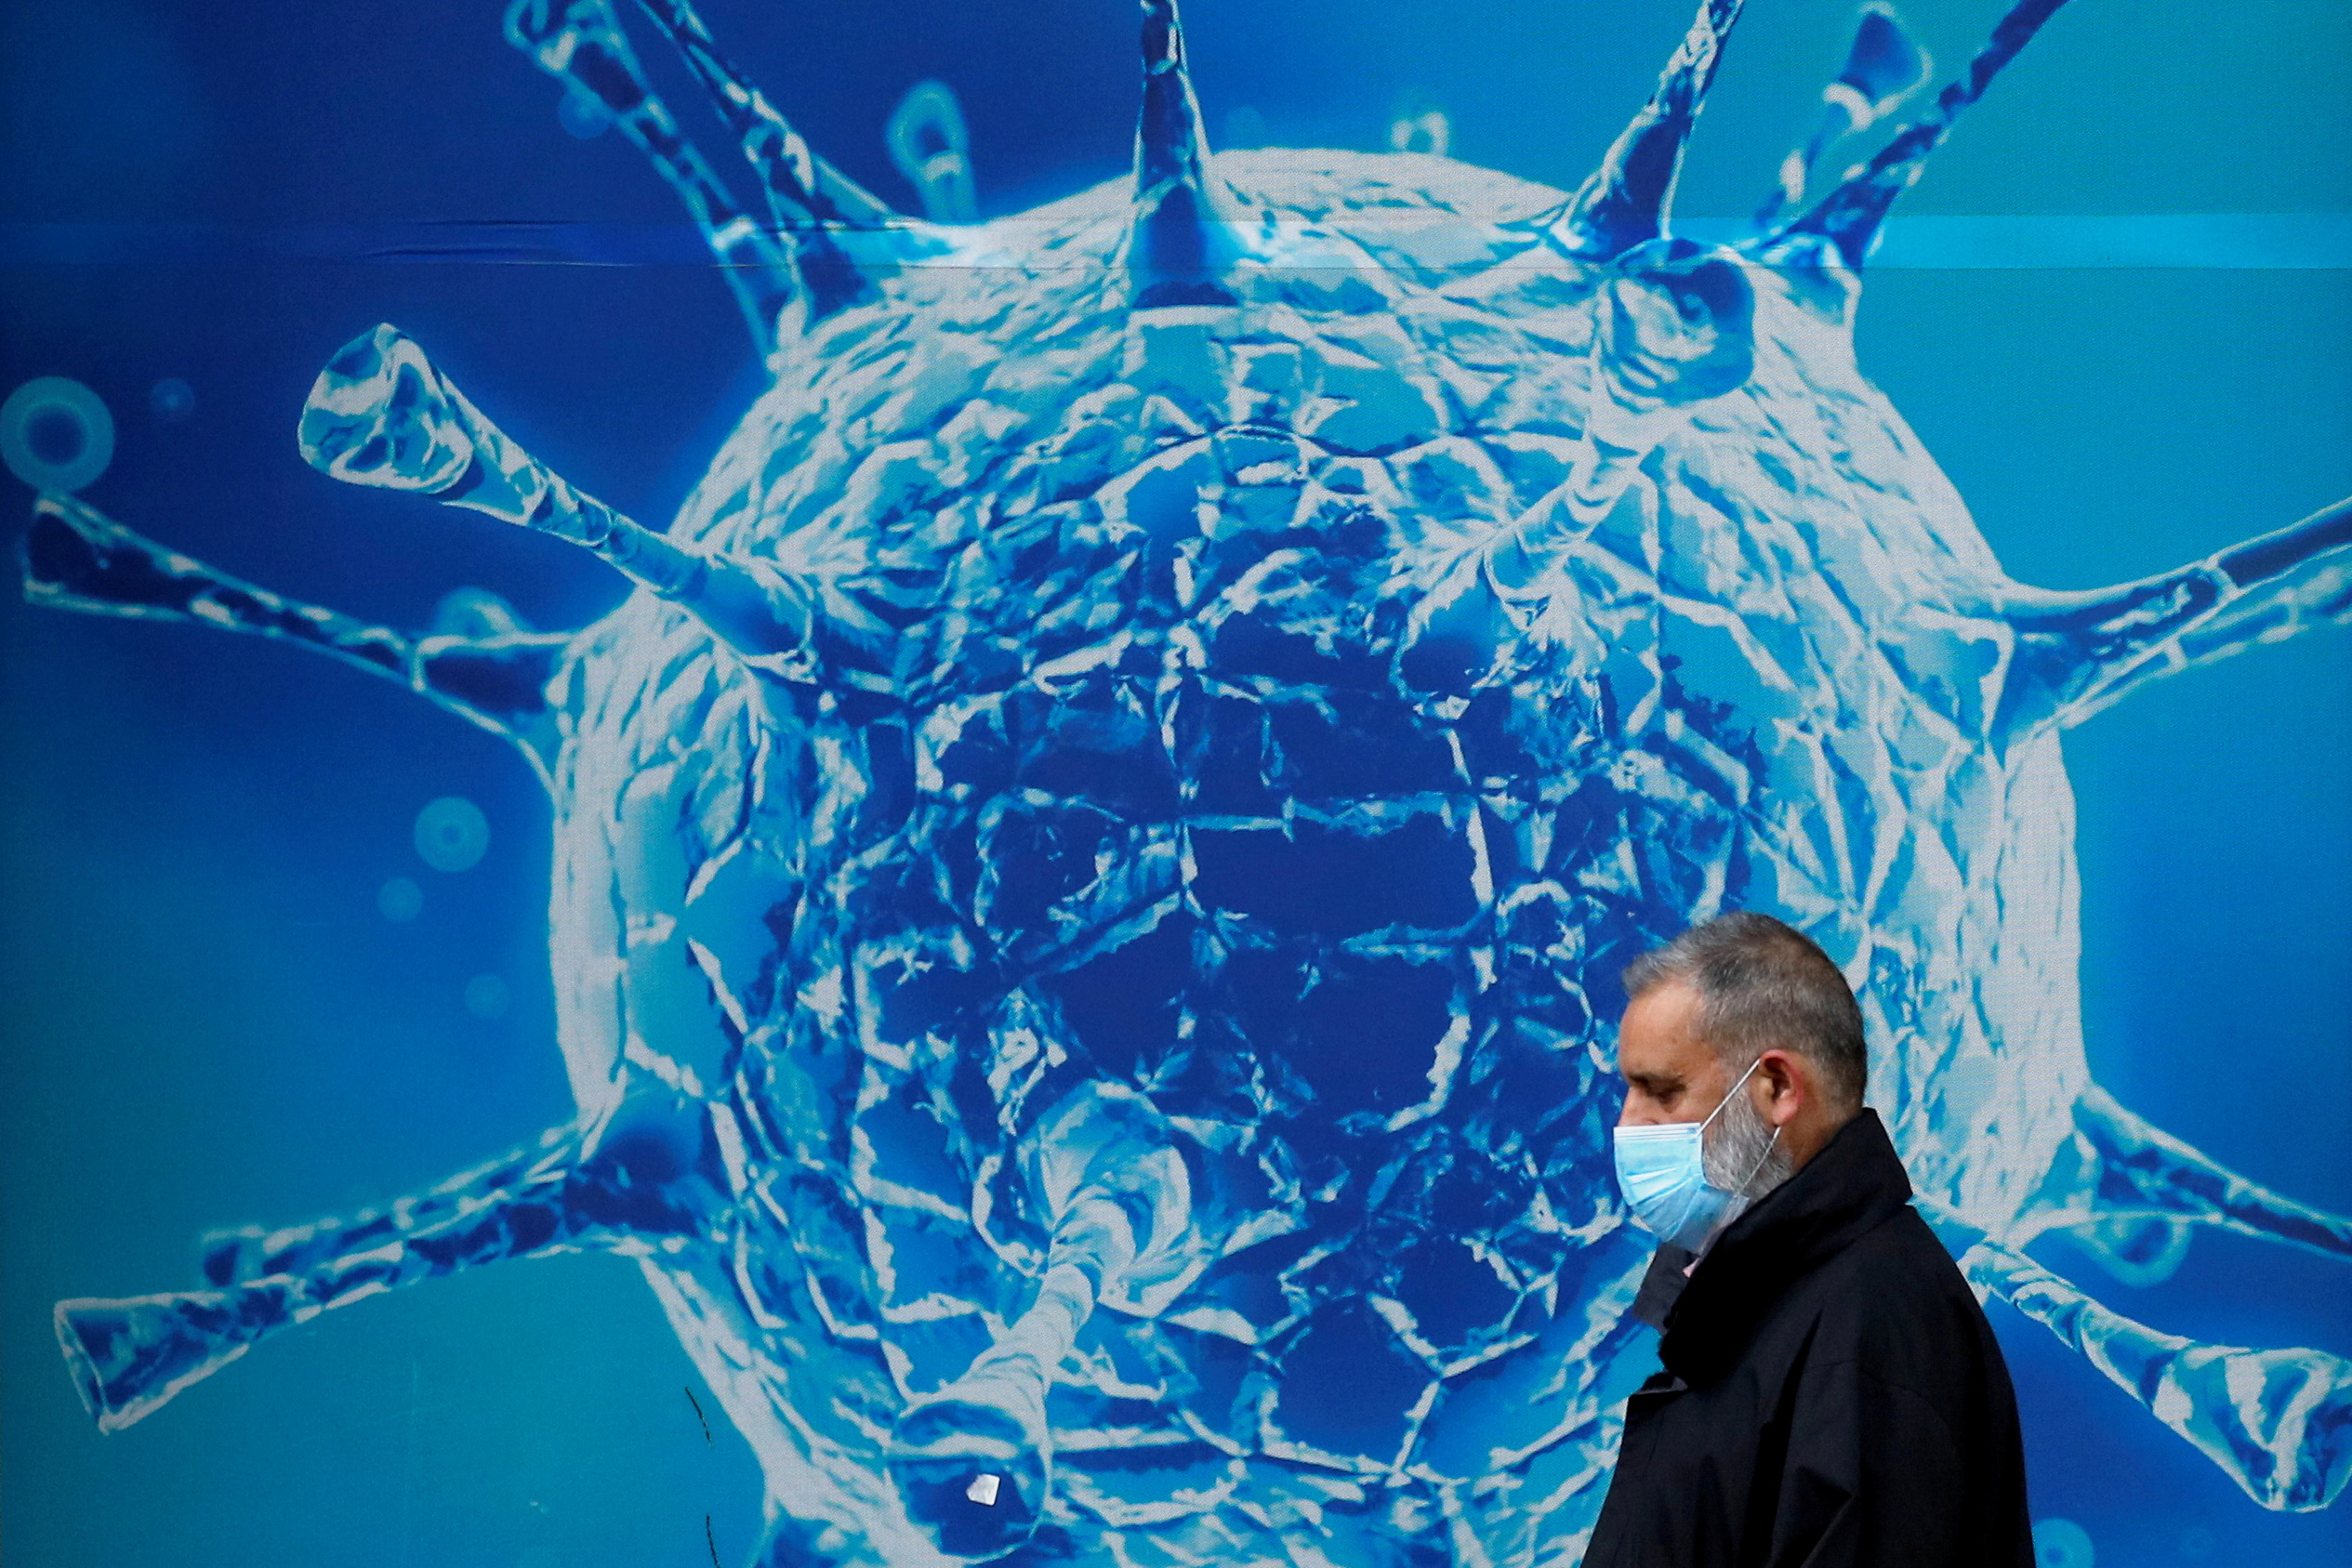 FILE PHOTO: A man wearing a protective face mask walks past an illustration of a virus outside a regional science centre amid the coronavirus disease (COVID-19) outbreak, in Oldham, Britain August 3, 2020. REUTERS/Phil Noble